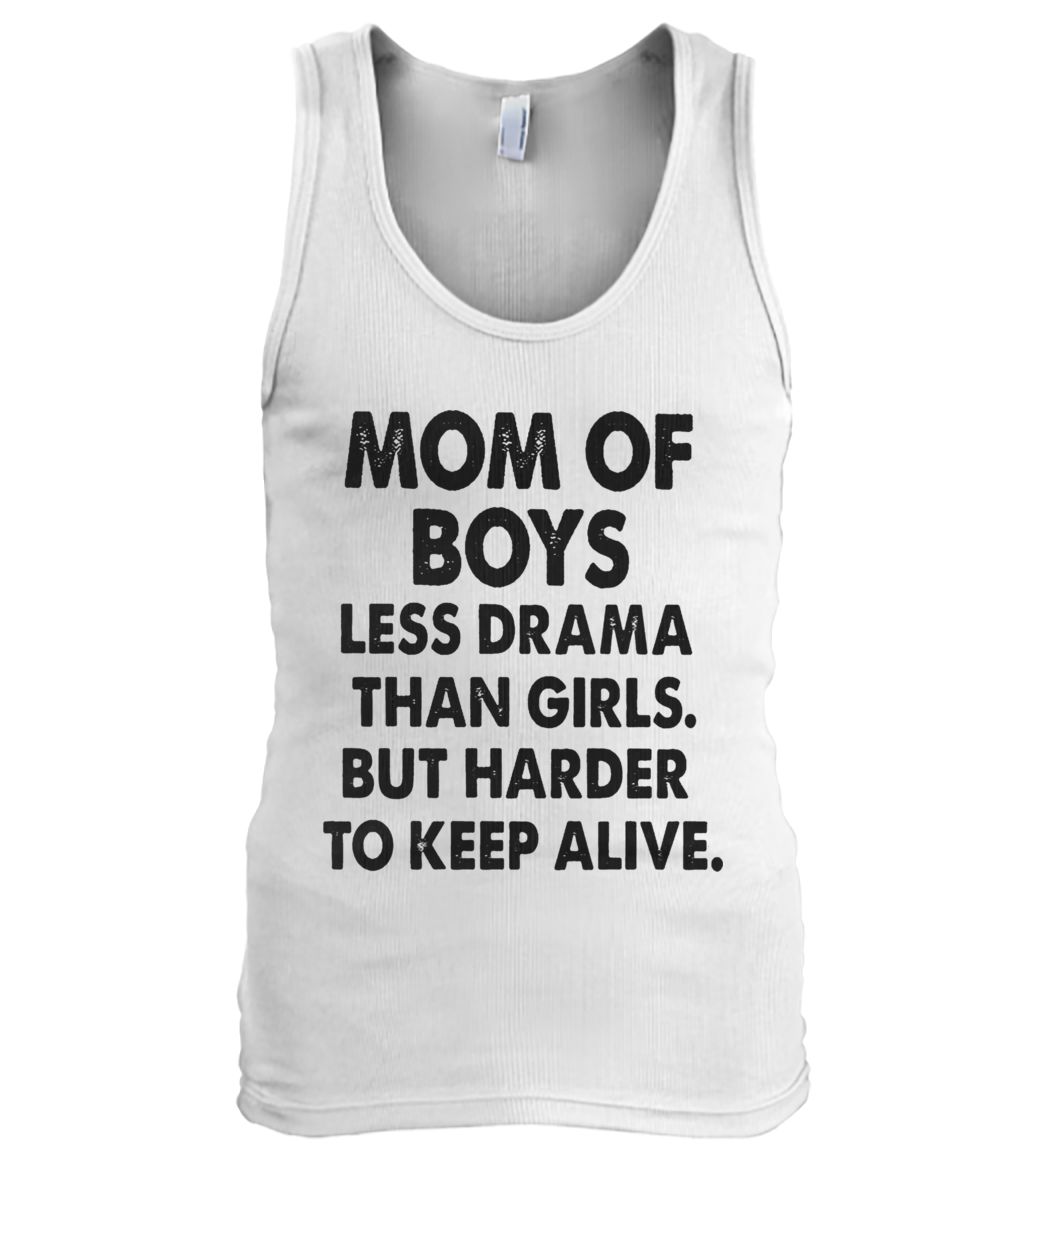 Mom of boys less drama than girls but harder to keep alive tank top